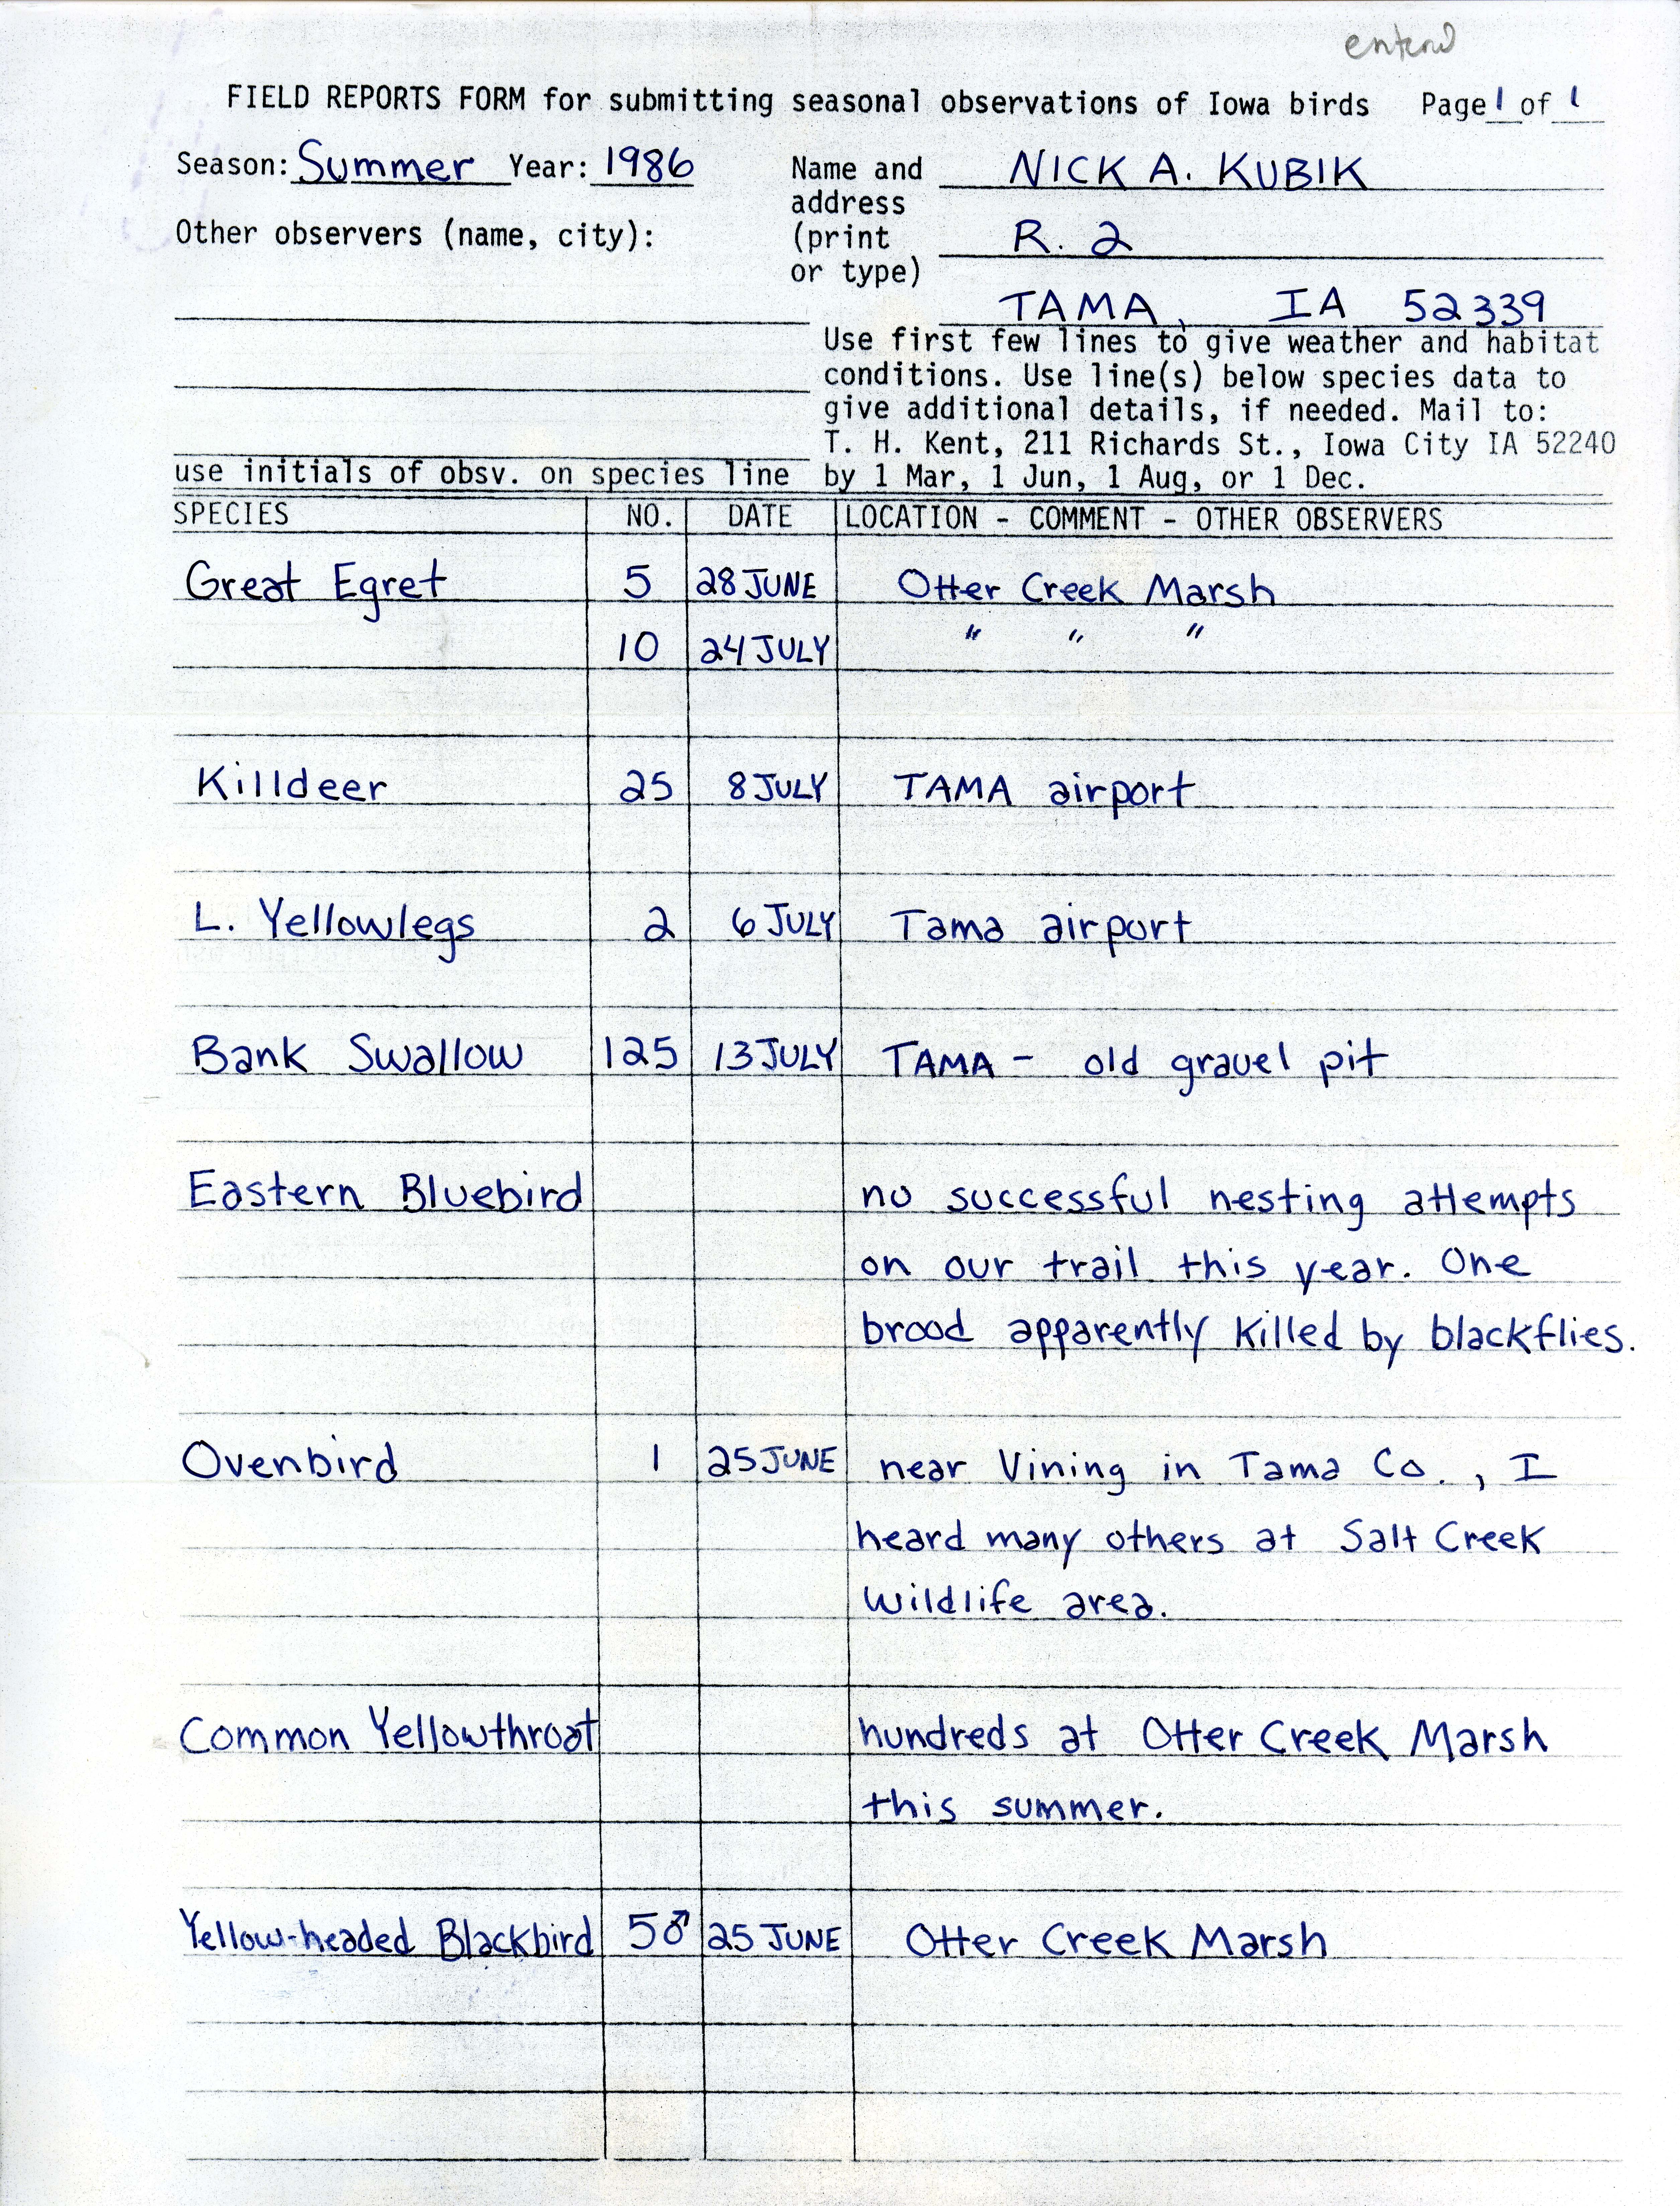 Field reports form for submitting seasonal observations of Iowa birds, Nicholas A. Kubrik, summer 1986